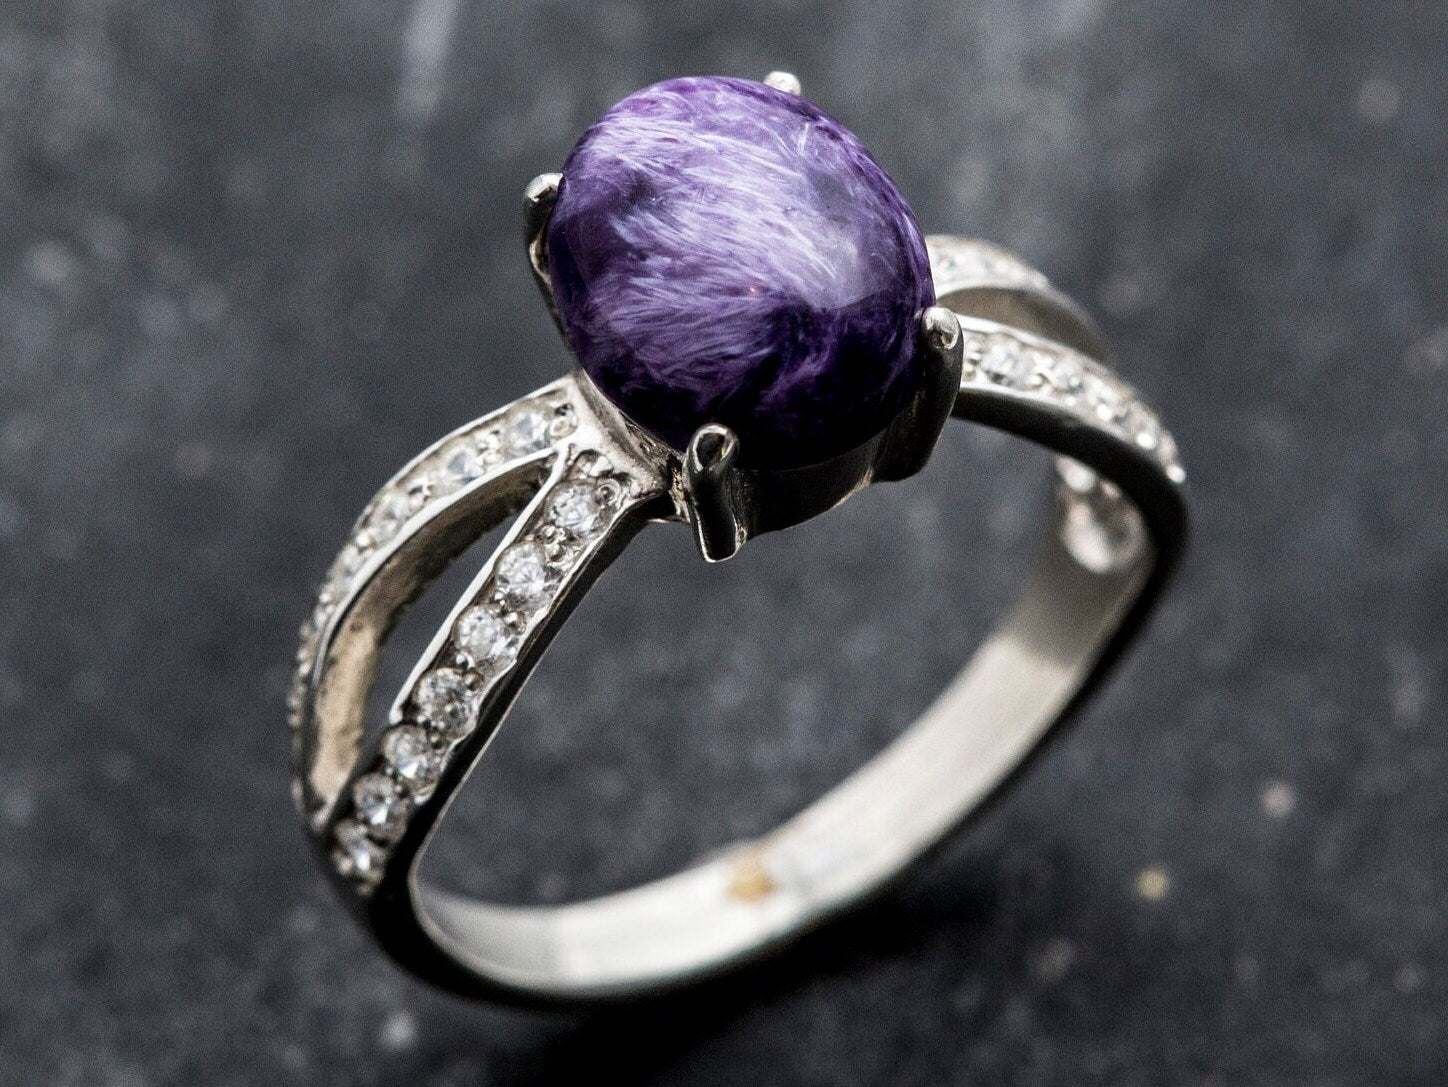 Charoite Ring, Natural Charoite, Solitaire Ring, Vintage Ring, Vintage Silver Ring, Scorpio Birthstone, Purple Ring, Charoite, Silver Ring